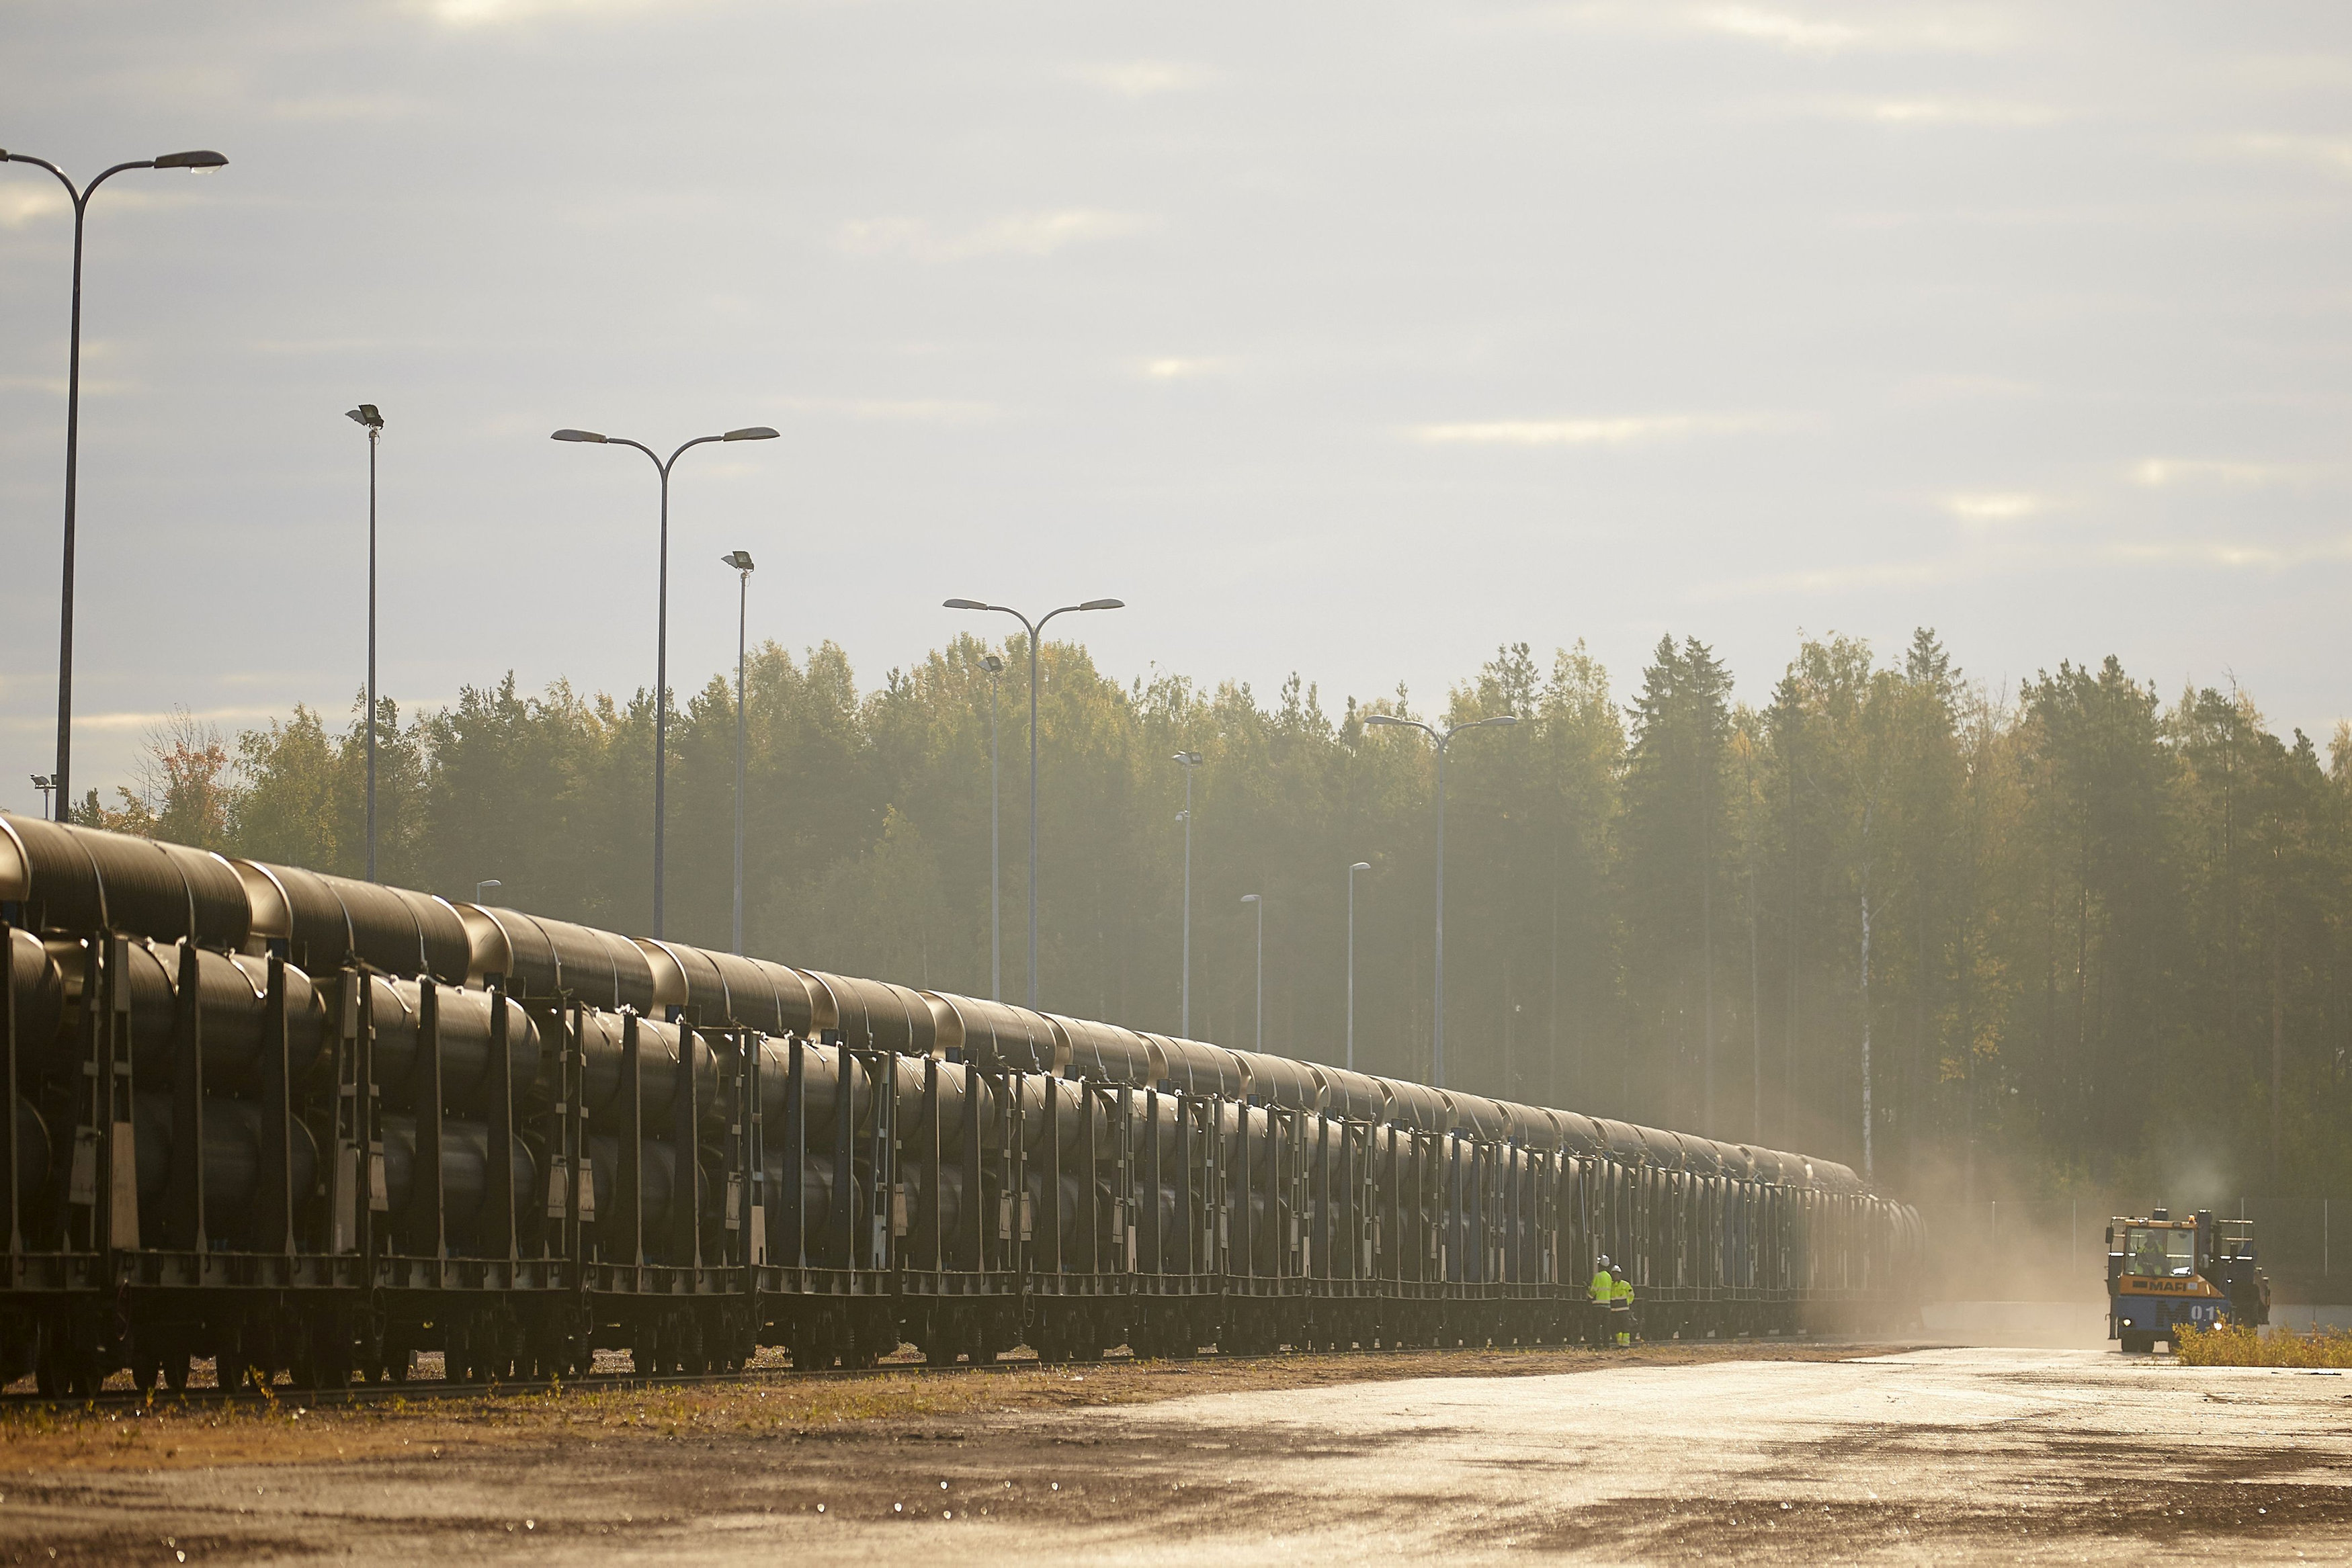 A handout by Nord Stream 2 claims to show the first steel pipes for the Nord Stream 2 pipeline arriving from a plant of OMK, which is one of the three pipe suppliers selected by Nord Stream 2 AG, to a coating plant in Kotka, Finland, in this undated photo provided to Reuters on March 23, 2017.  Axel Schmidt/Courtesy of Nord Stream 2/Handout via REUTERS